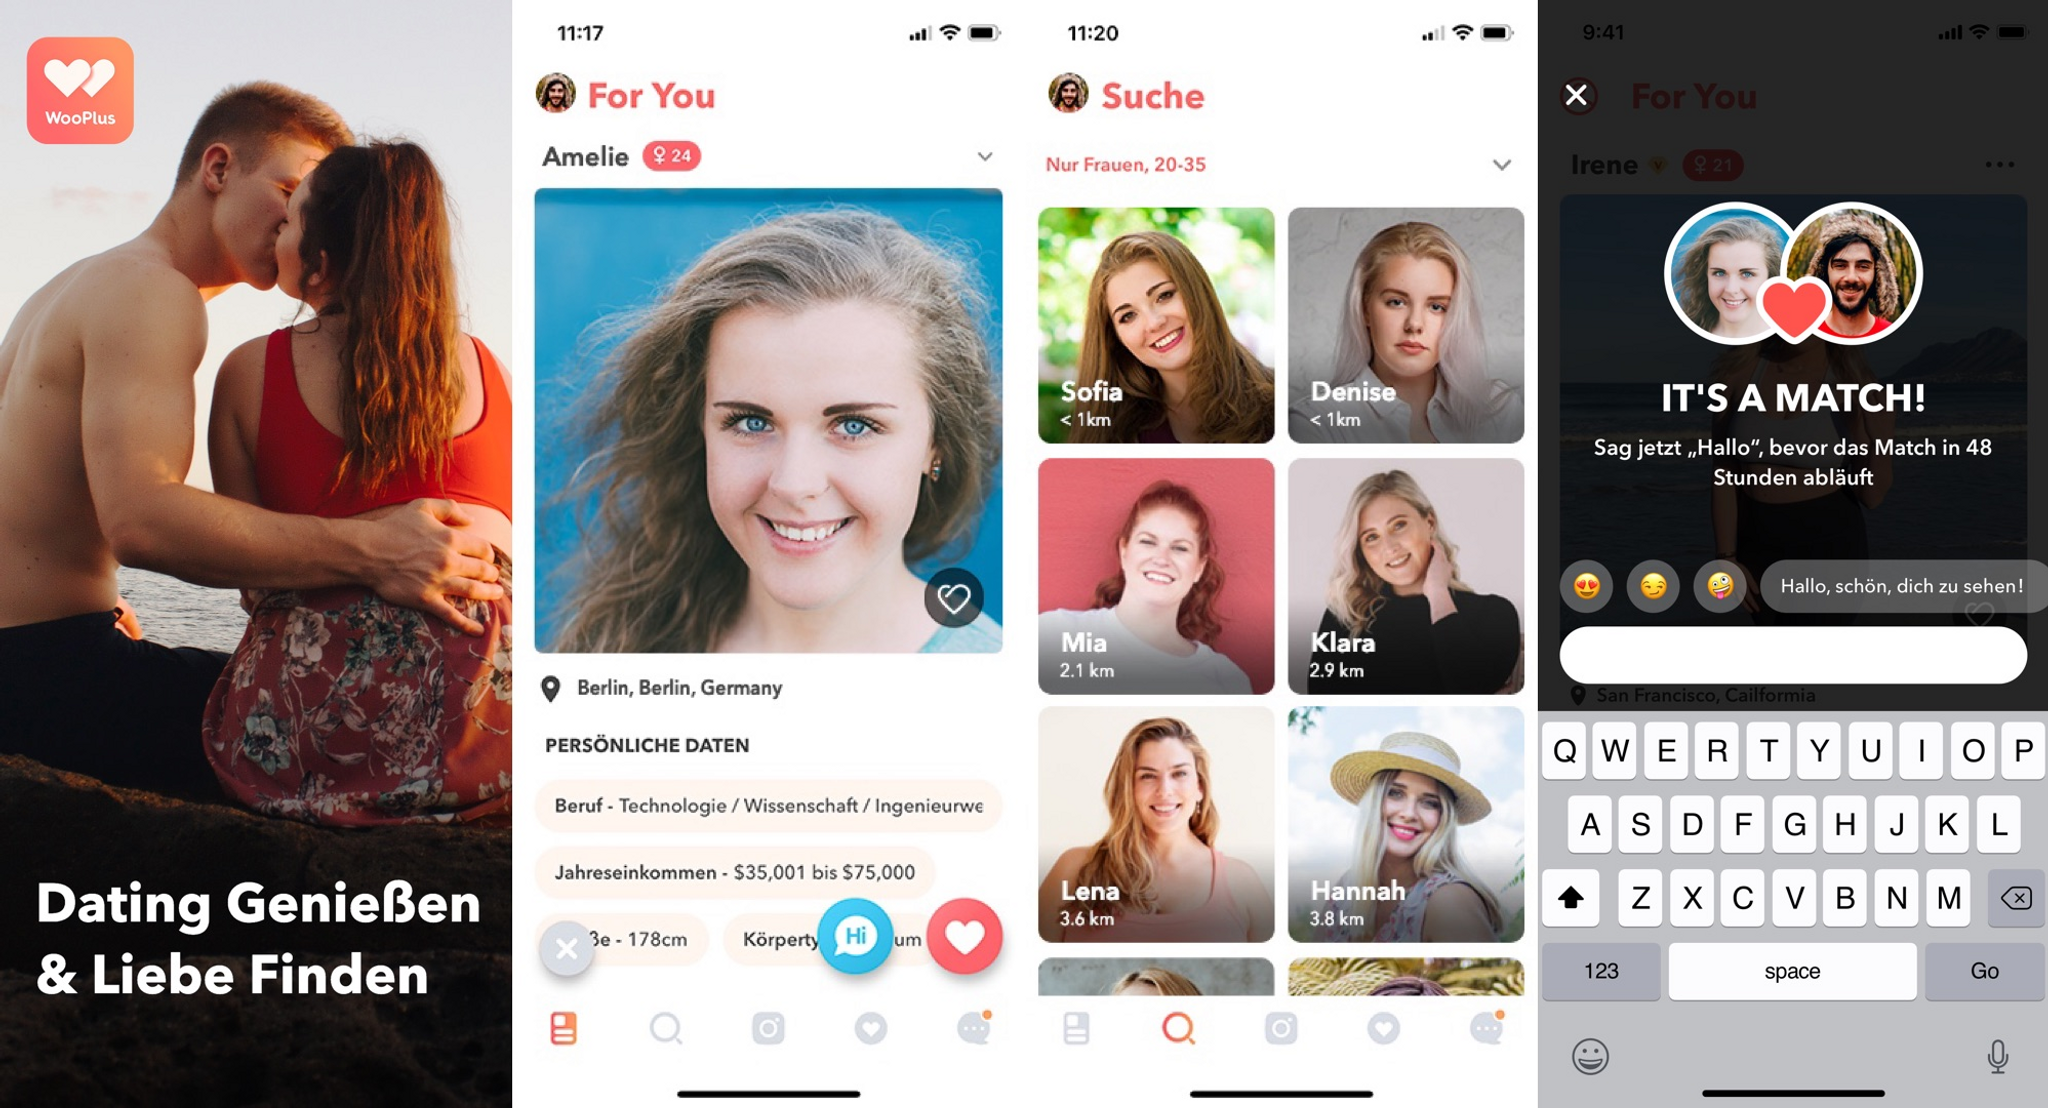 WooPlus™, the Dating App for Curvy People, Reaching 5 Million Members, Adds the German Language to Continue Strong Growth Trajectory